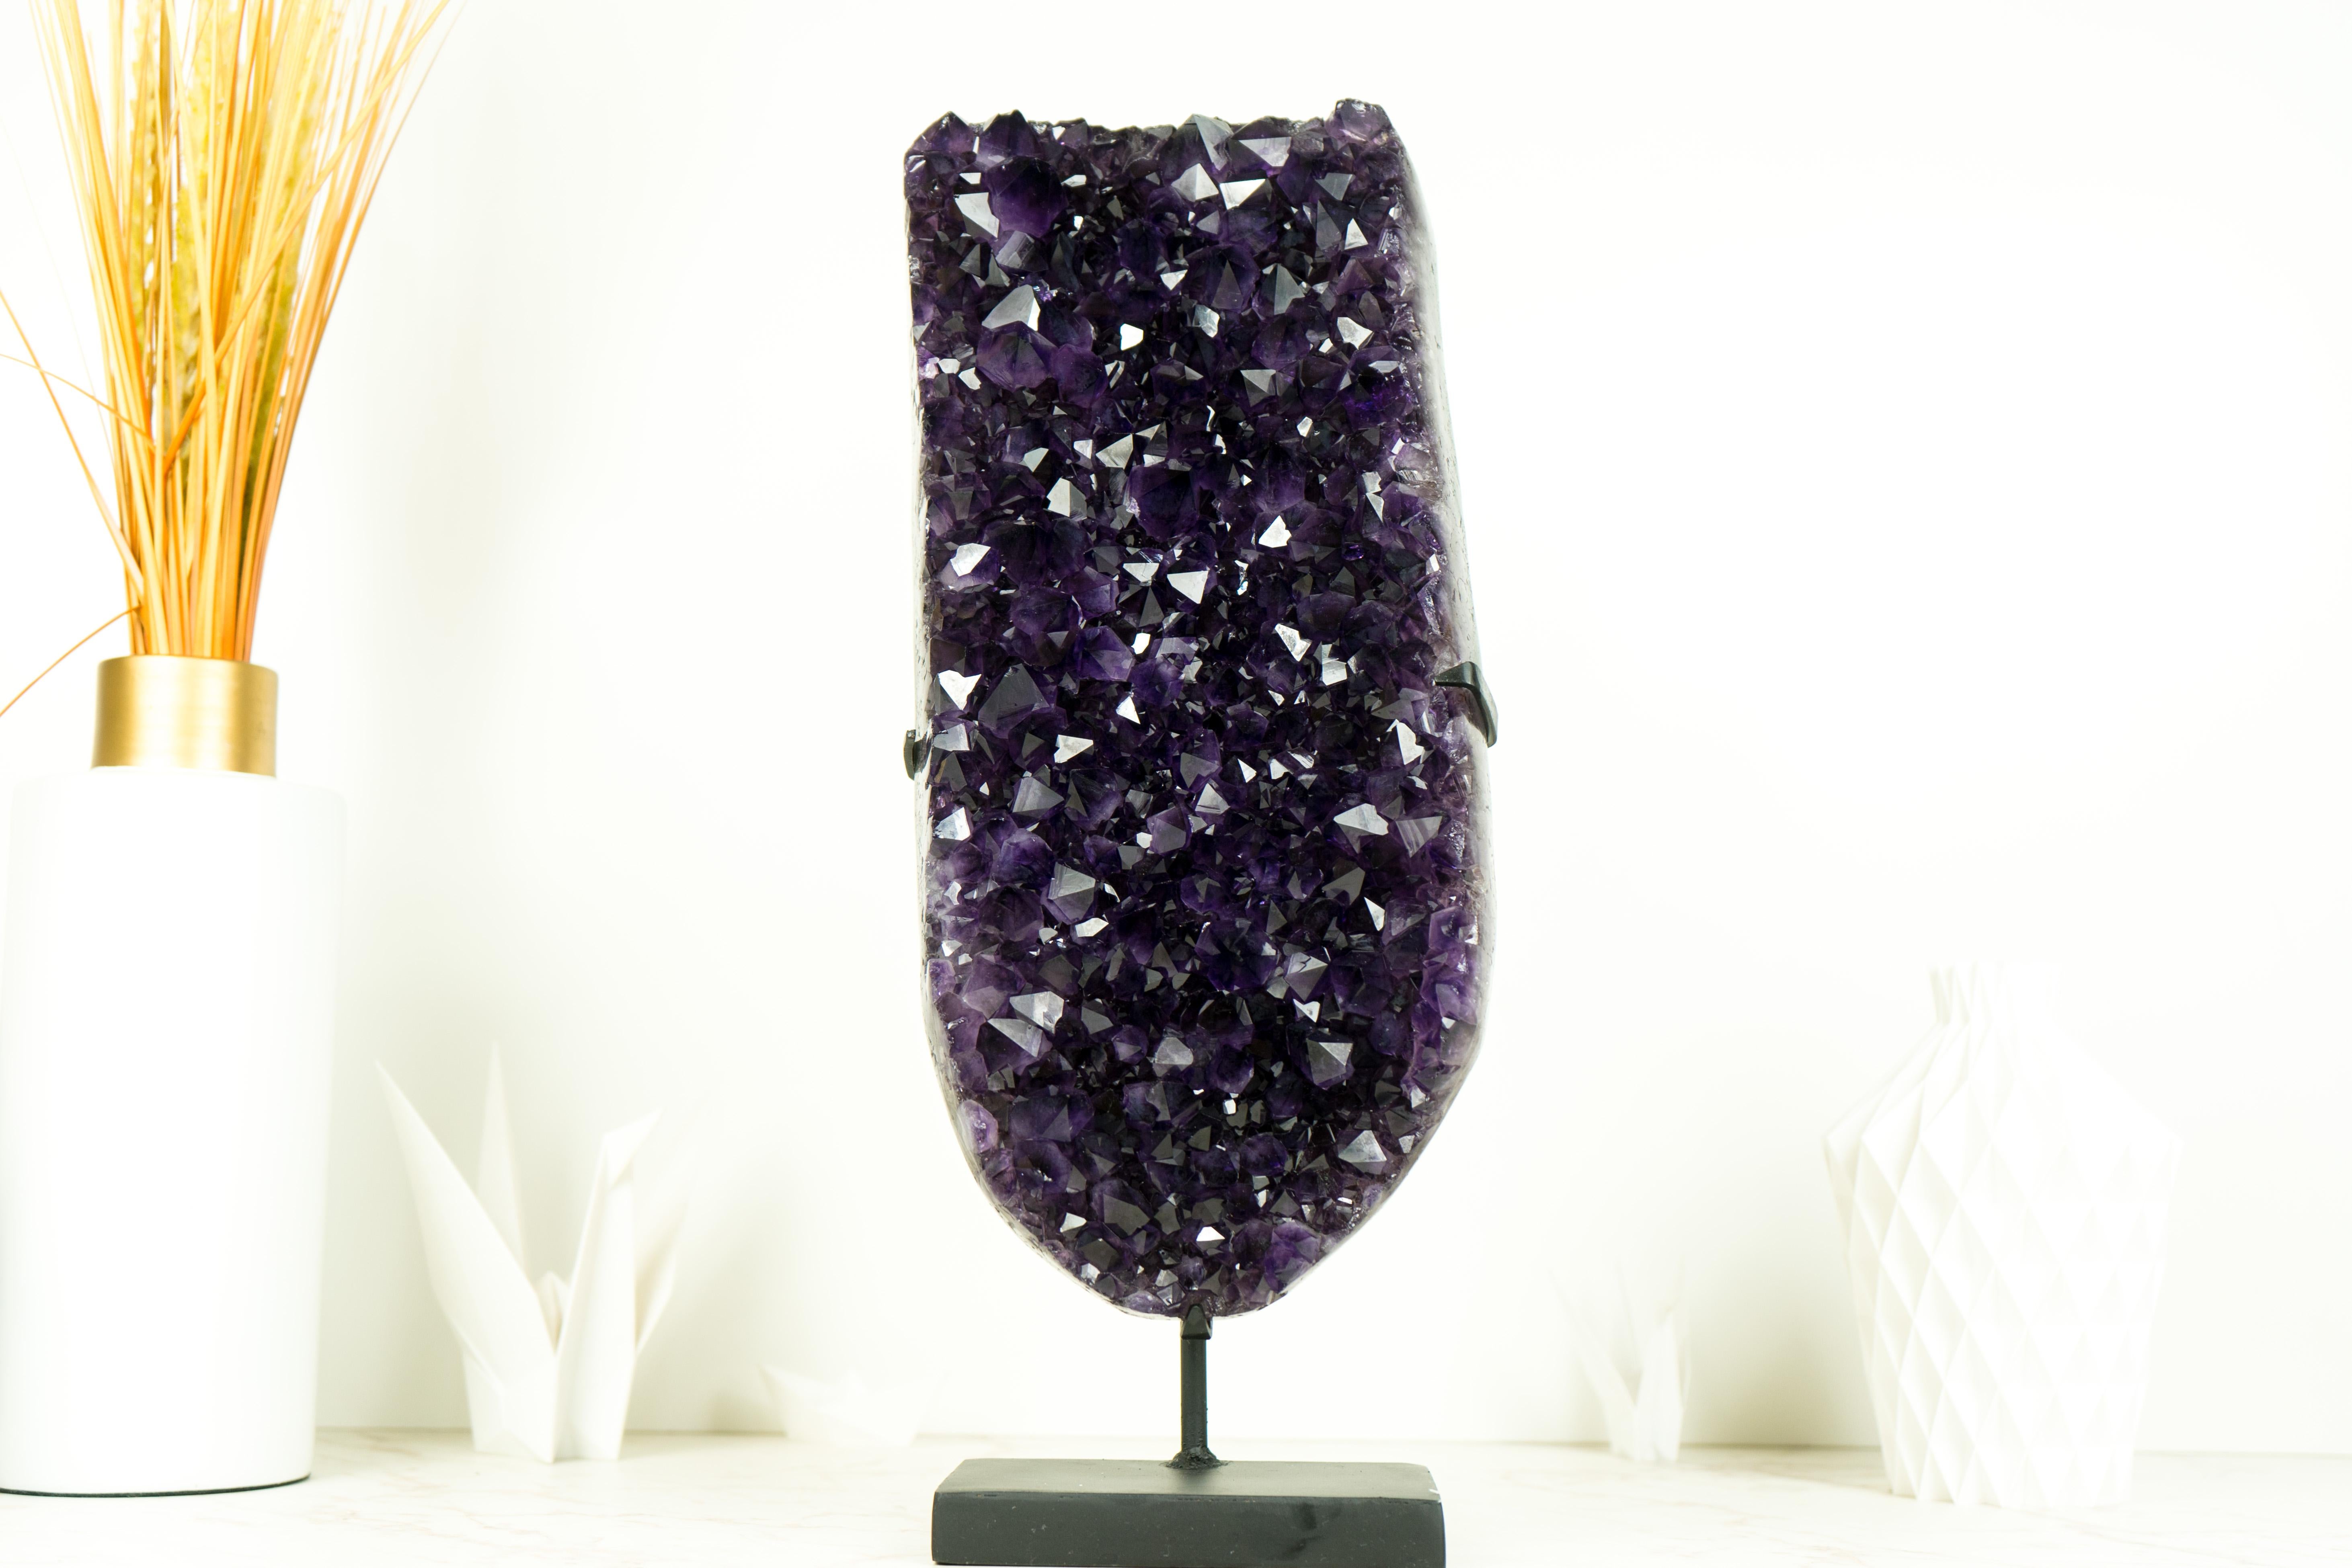 Brazilian Deep Purple Amethyst Cluster with High-Grade, Natural Grape Jelly Amethyst Druzy For Sale